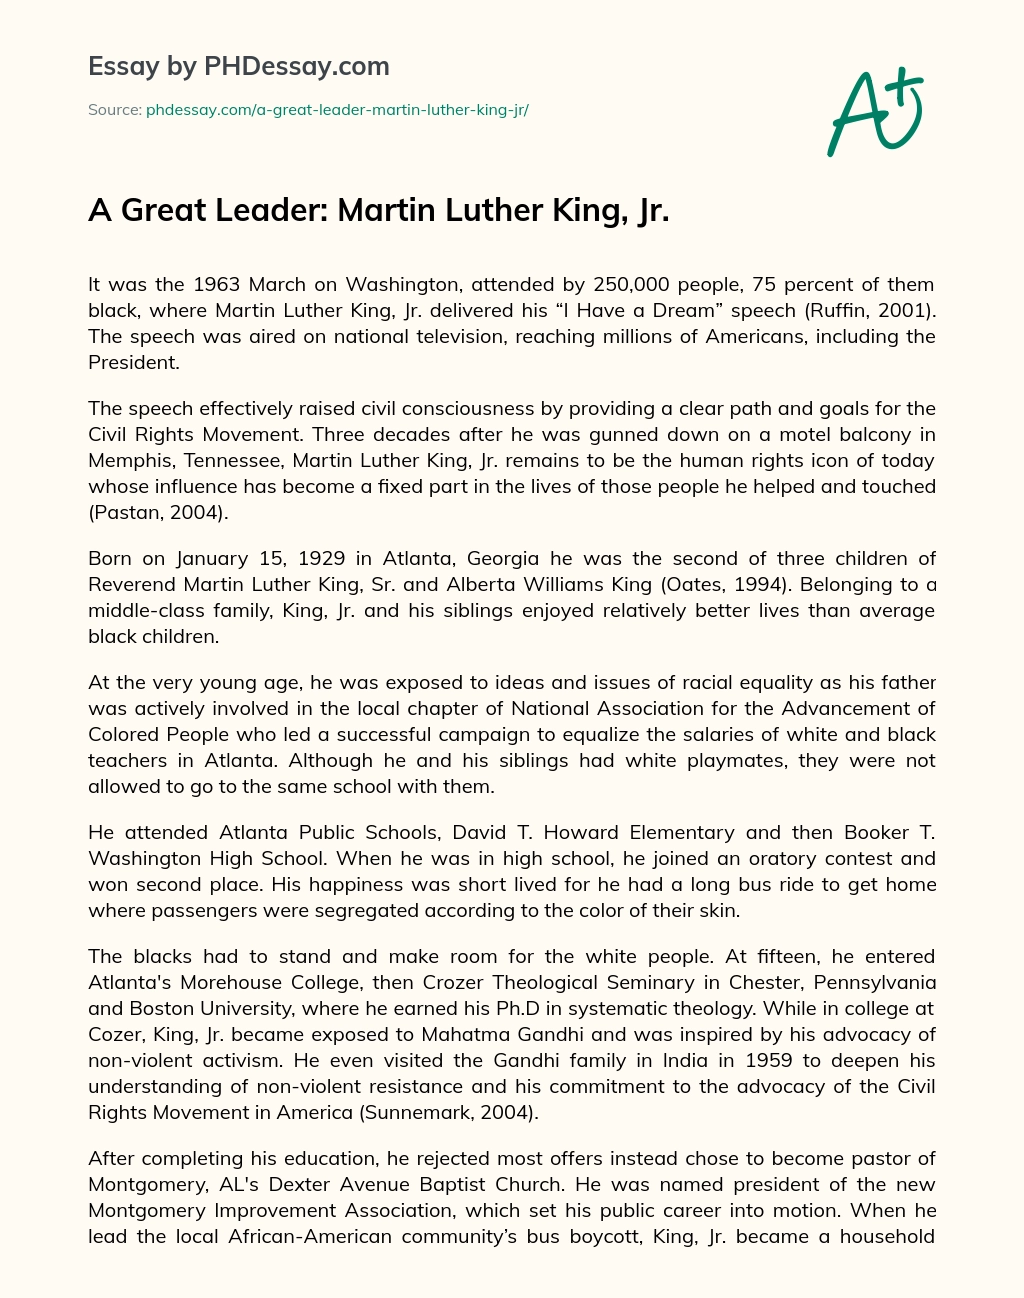 A Great Leader: Martin Luther King, Jr. essay